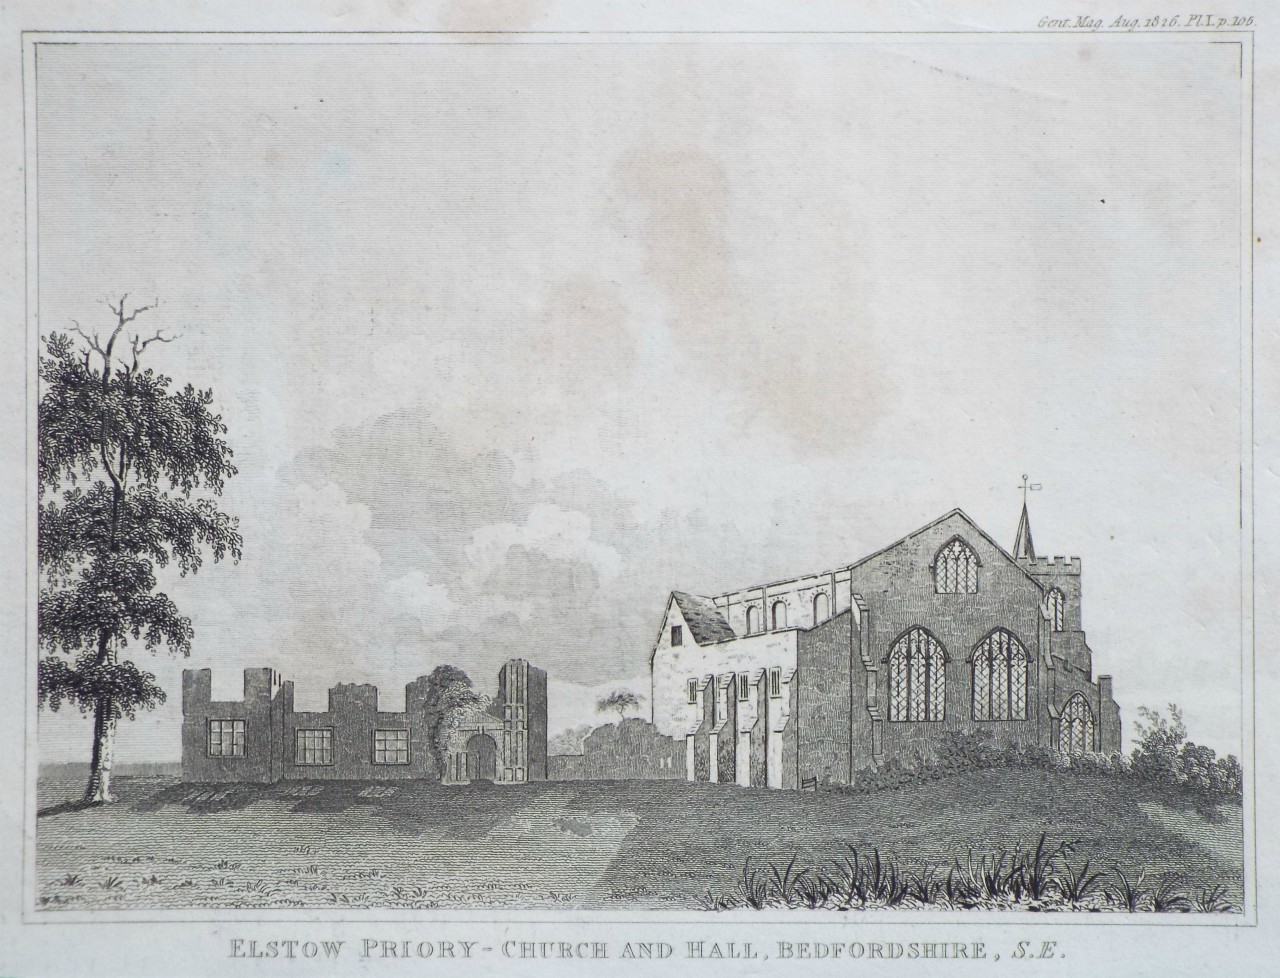 Print - Elstow Priory - Church and Hall, Bedfordshire, S. E.